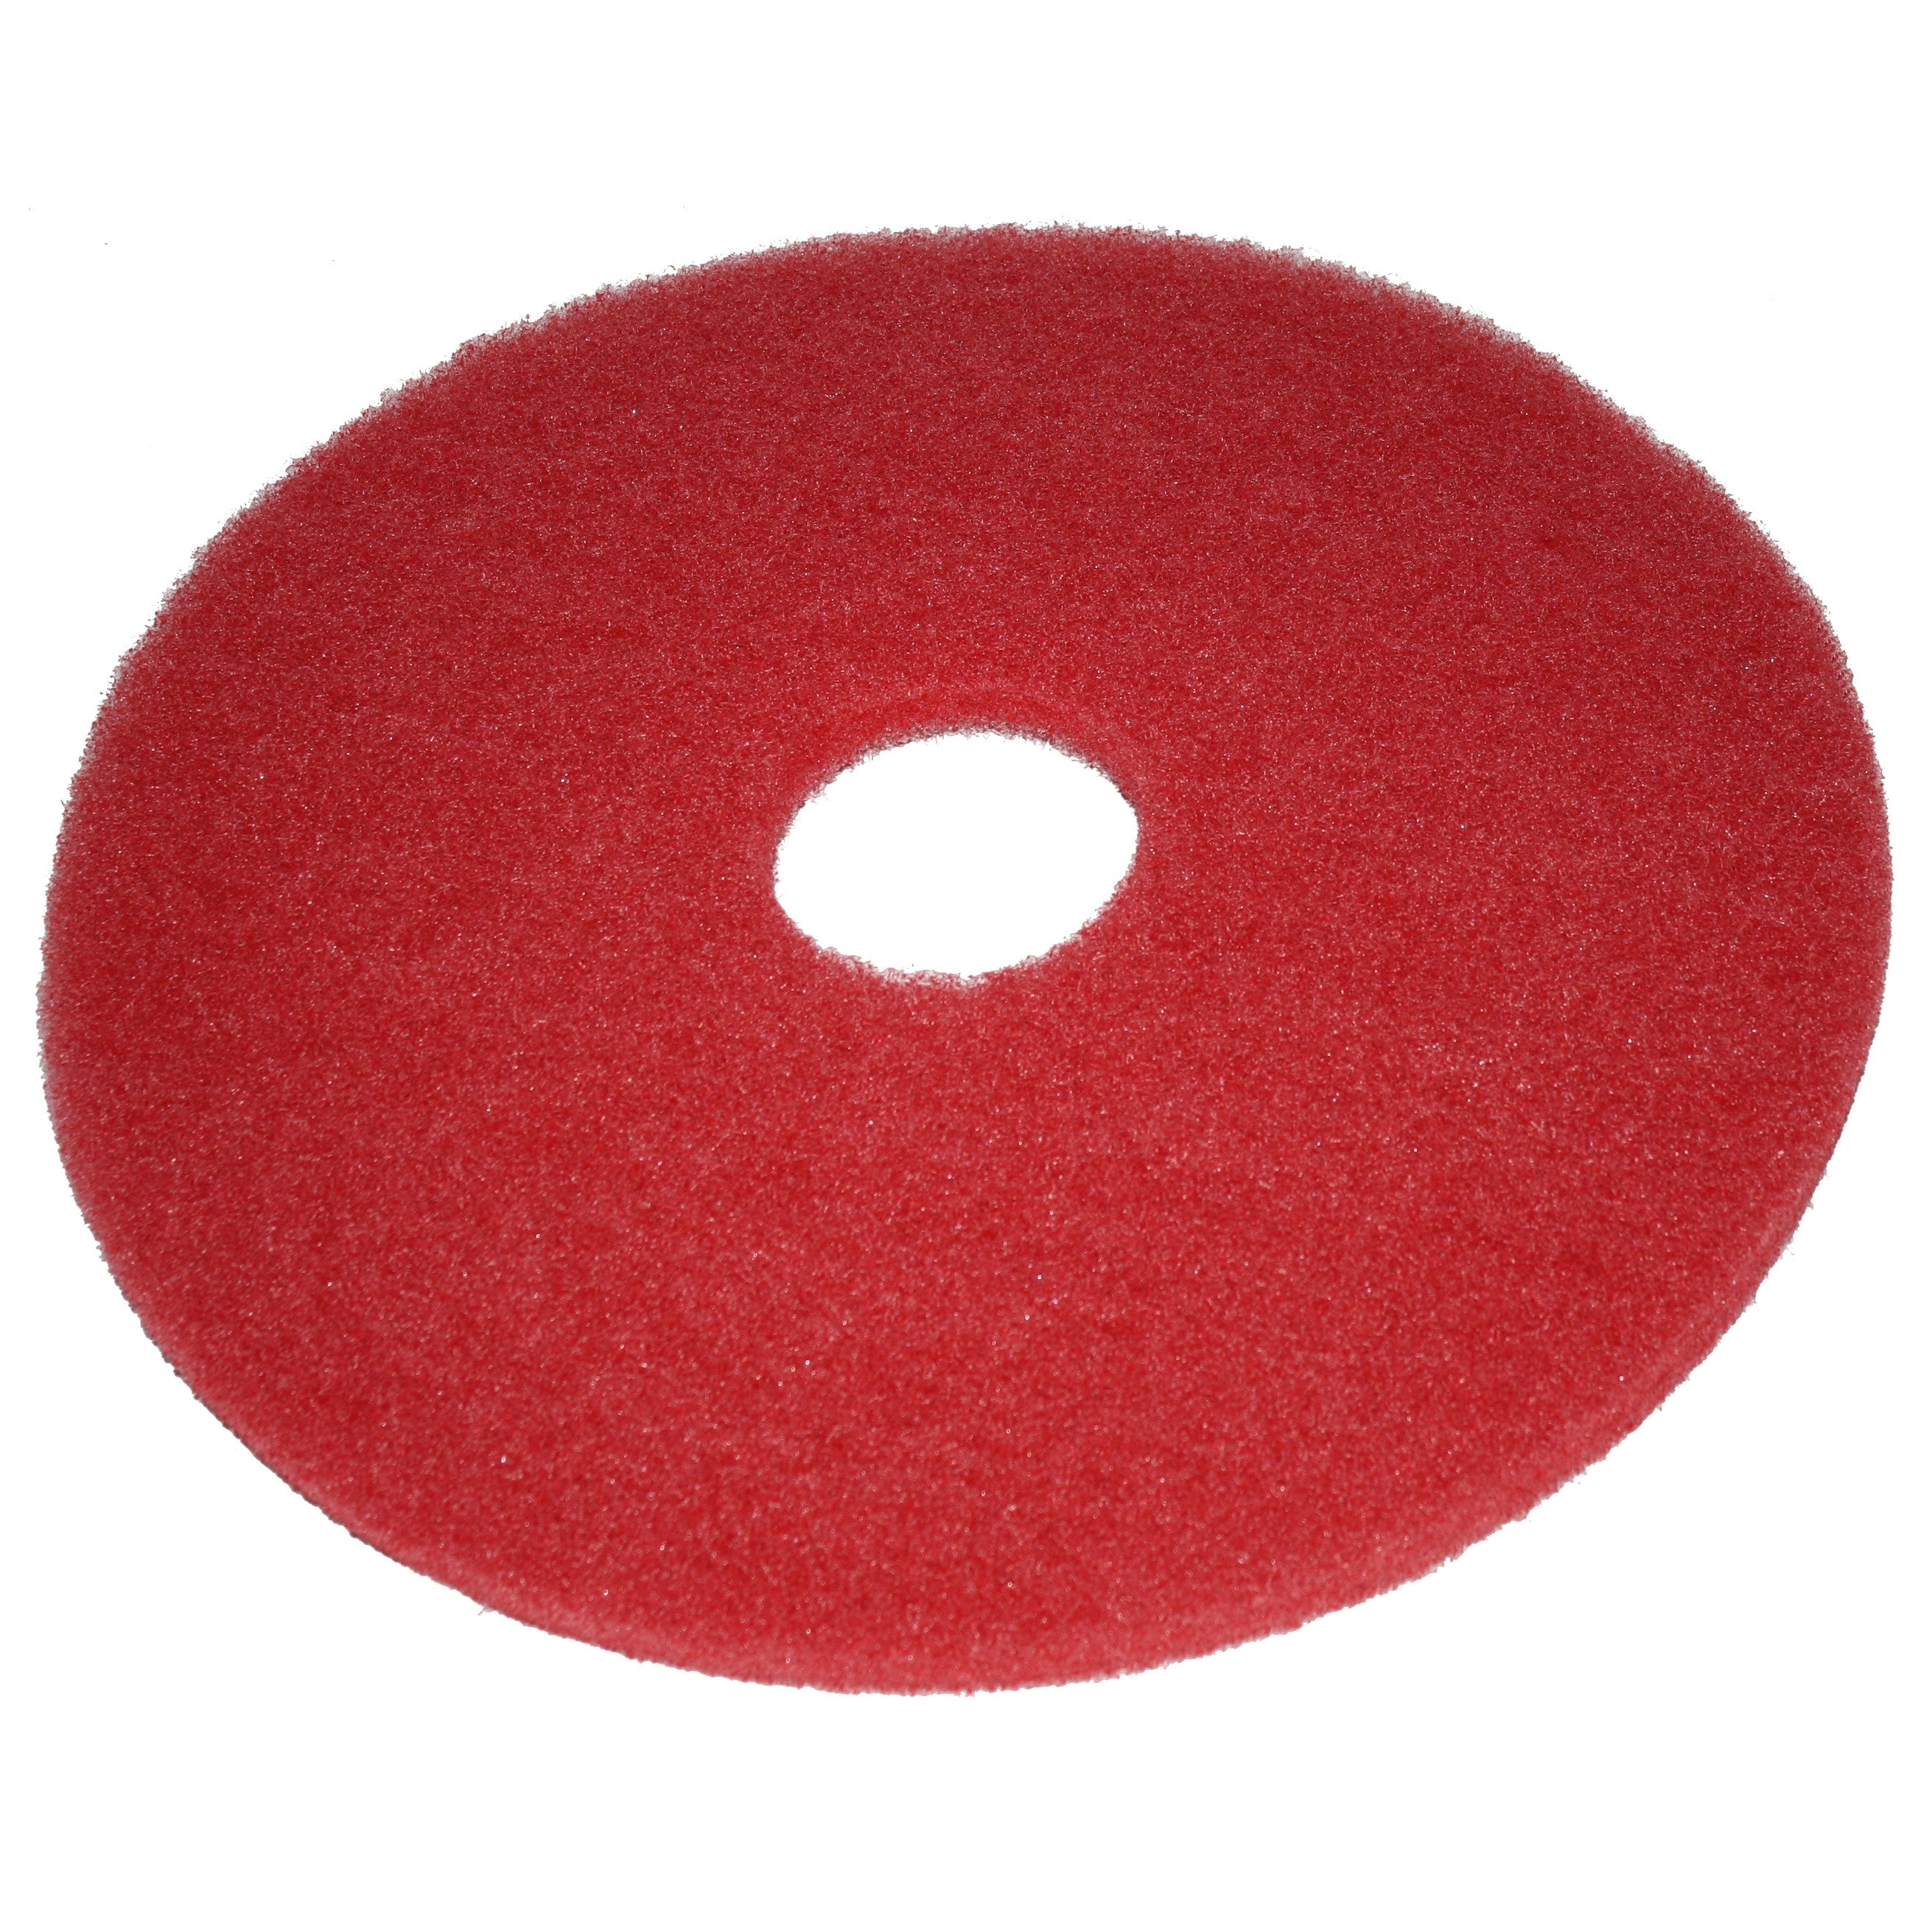 Pad rouge, Ø 330 mm, polyester